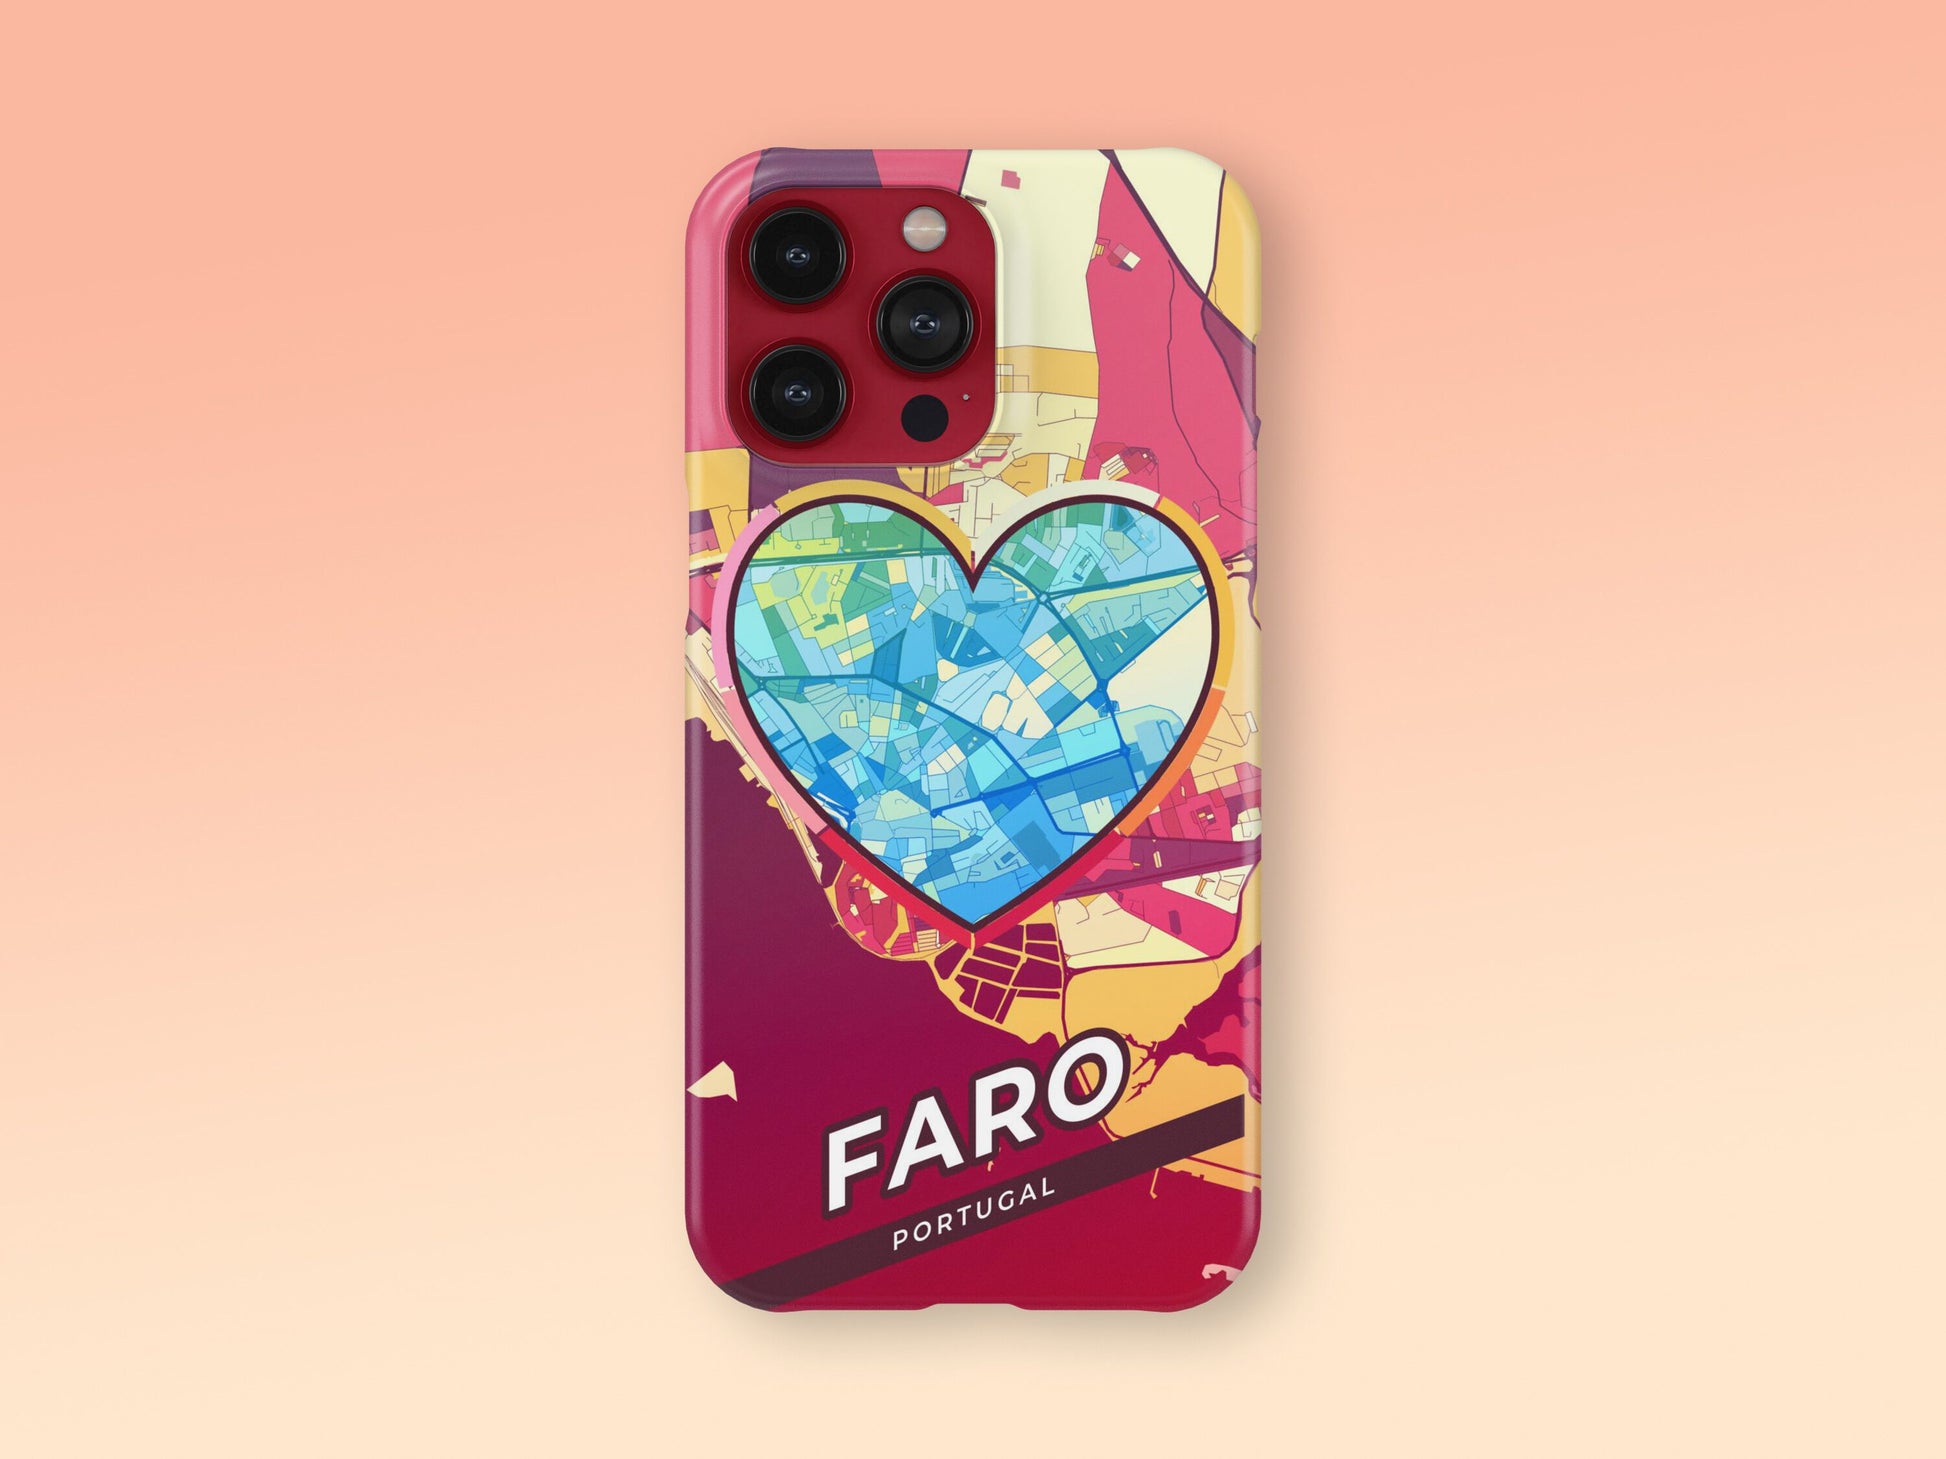 Faro Portugal slim phone case with colorful icon. Birthday, wedding or housewarming gift. Couple match cases. 2